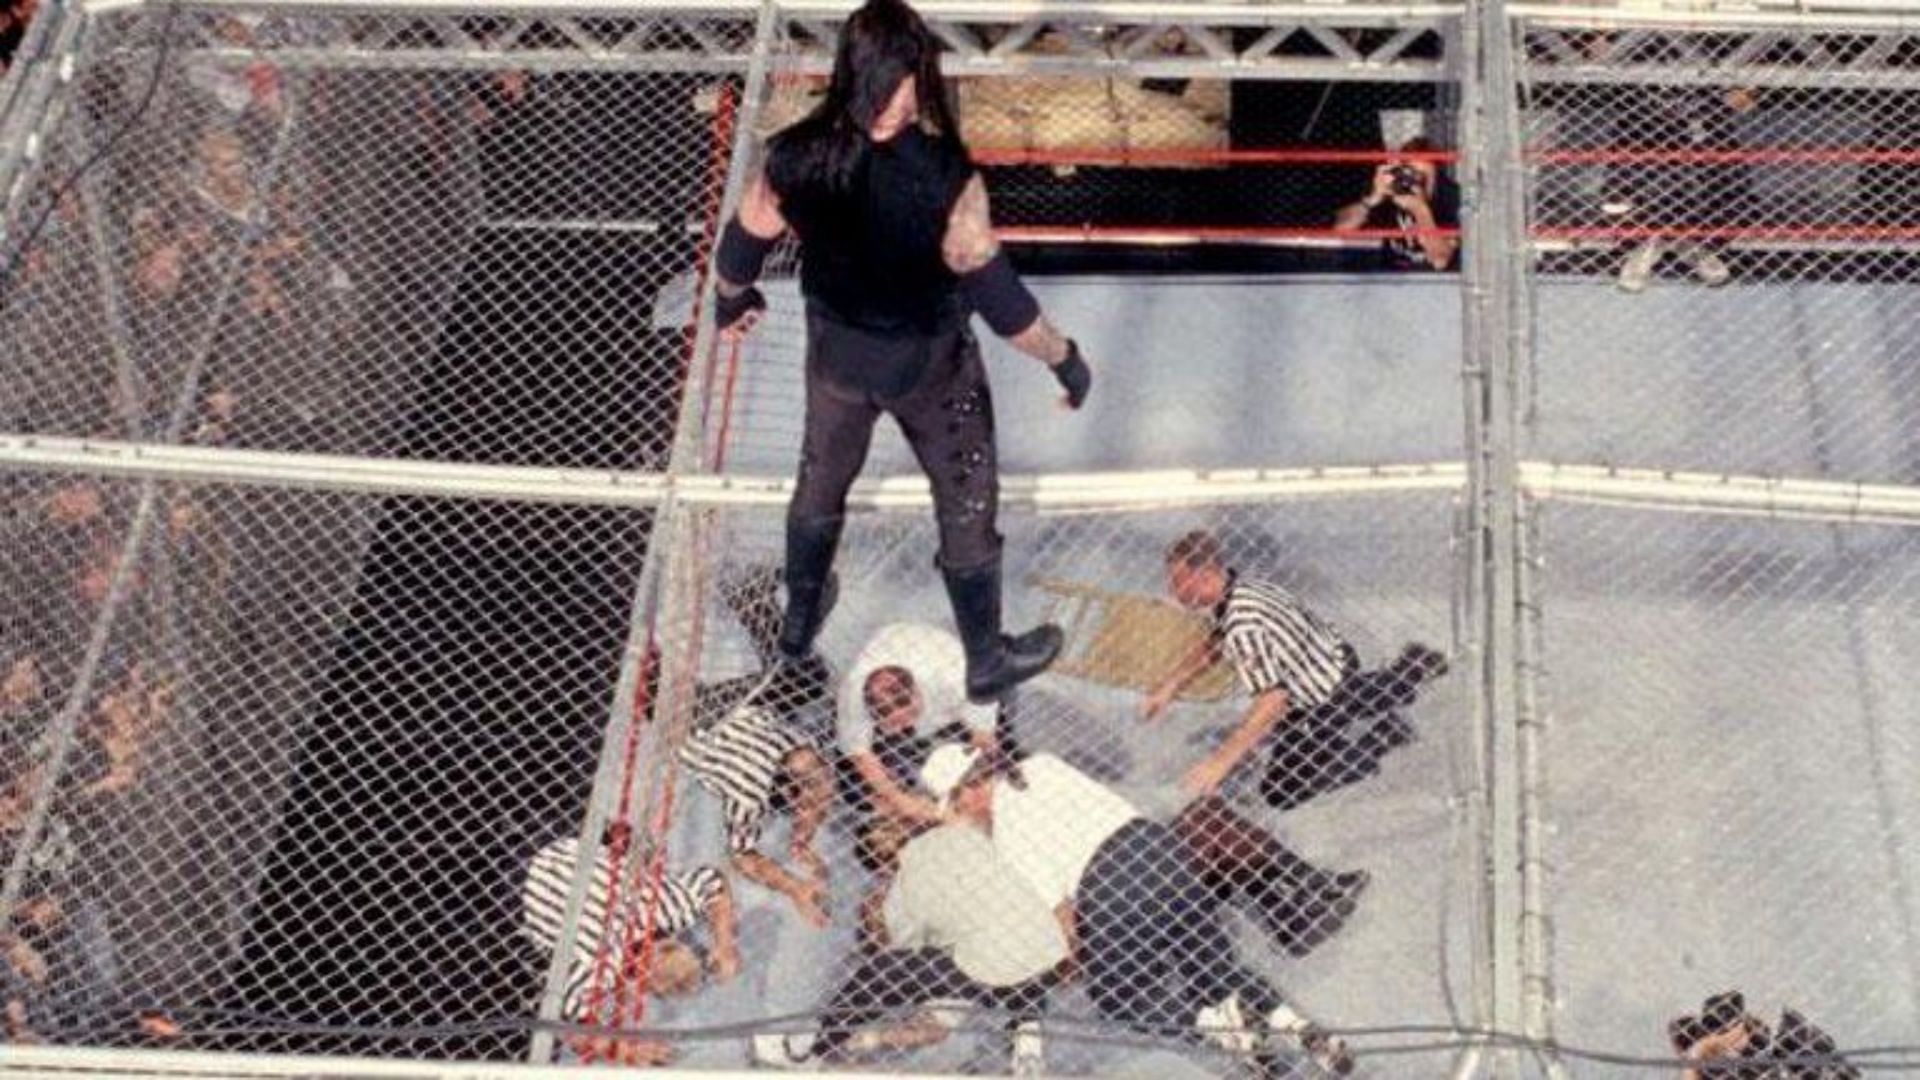 Mick Foley almost died during his match against The Undertaker at KOTR 1998